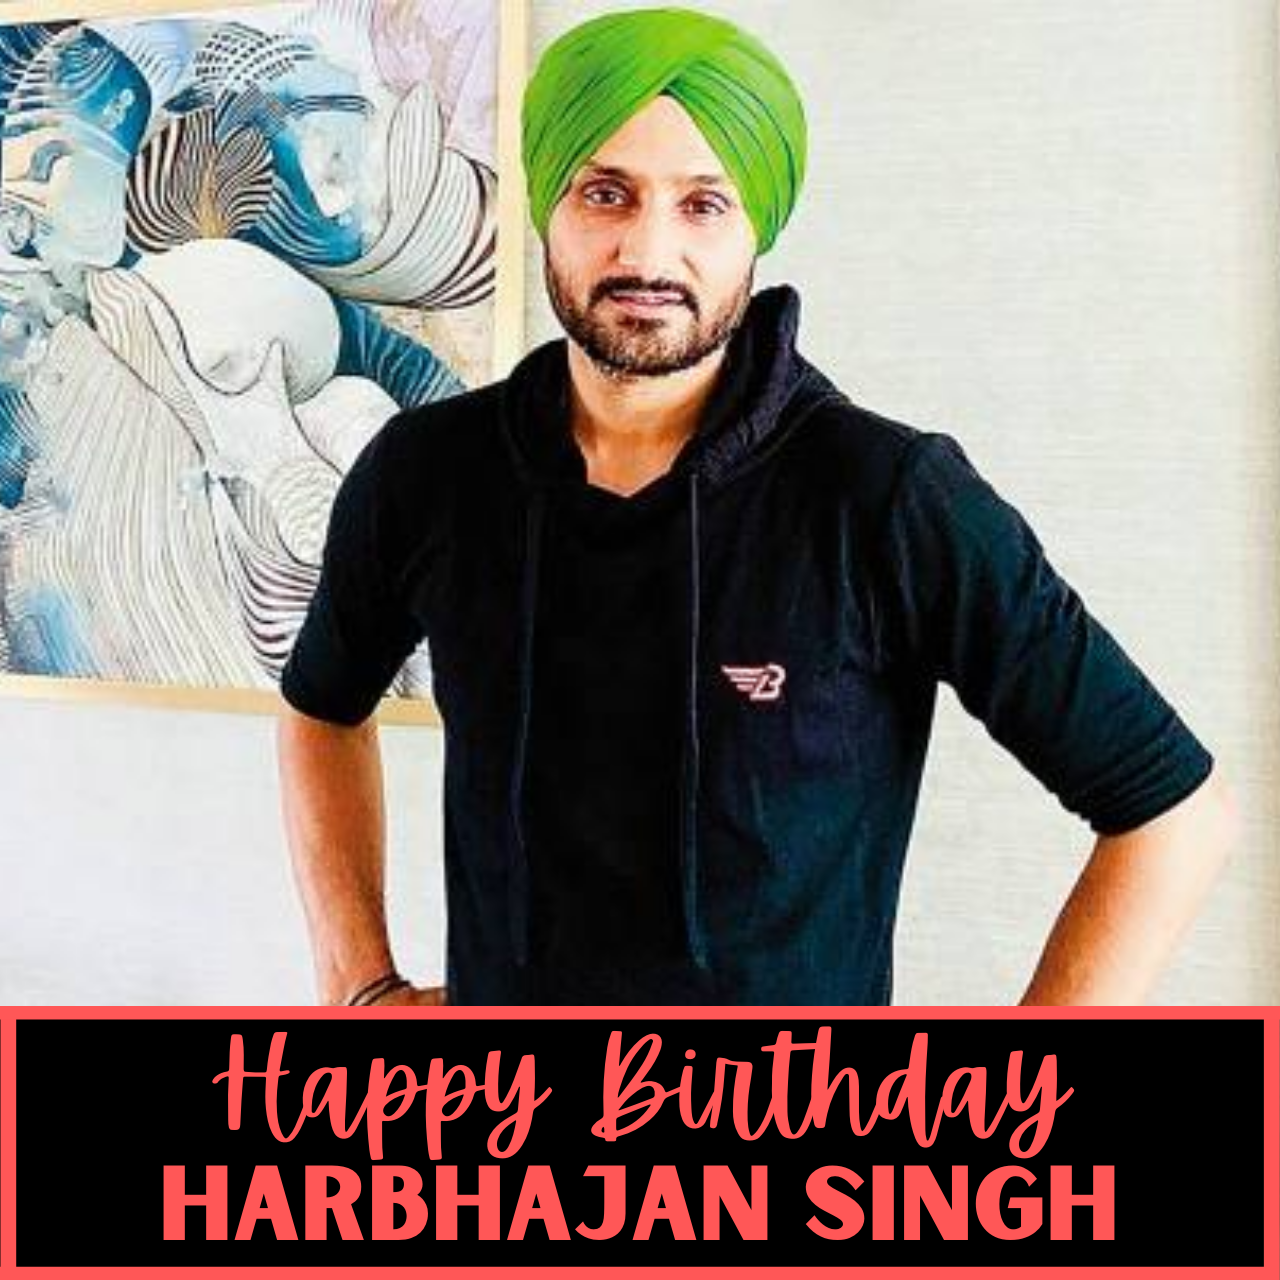 Happy Birthday Harbhajan Singh Wishes, Photos (images), Messages, and Status to Greet "Bhajji"